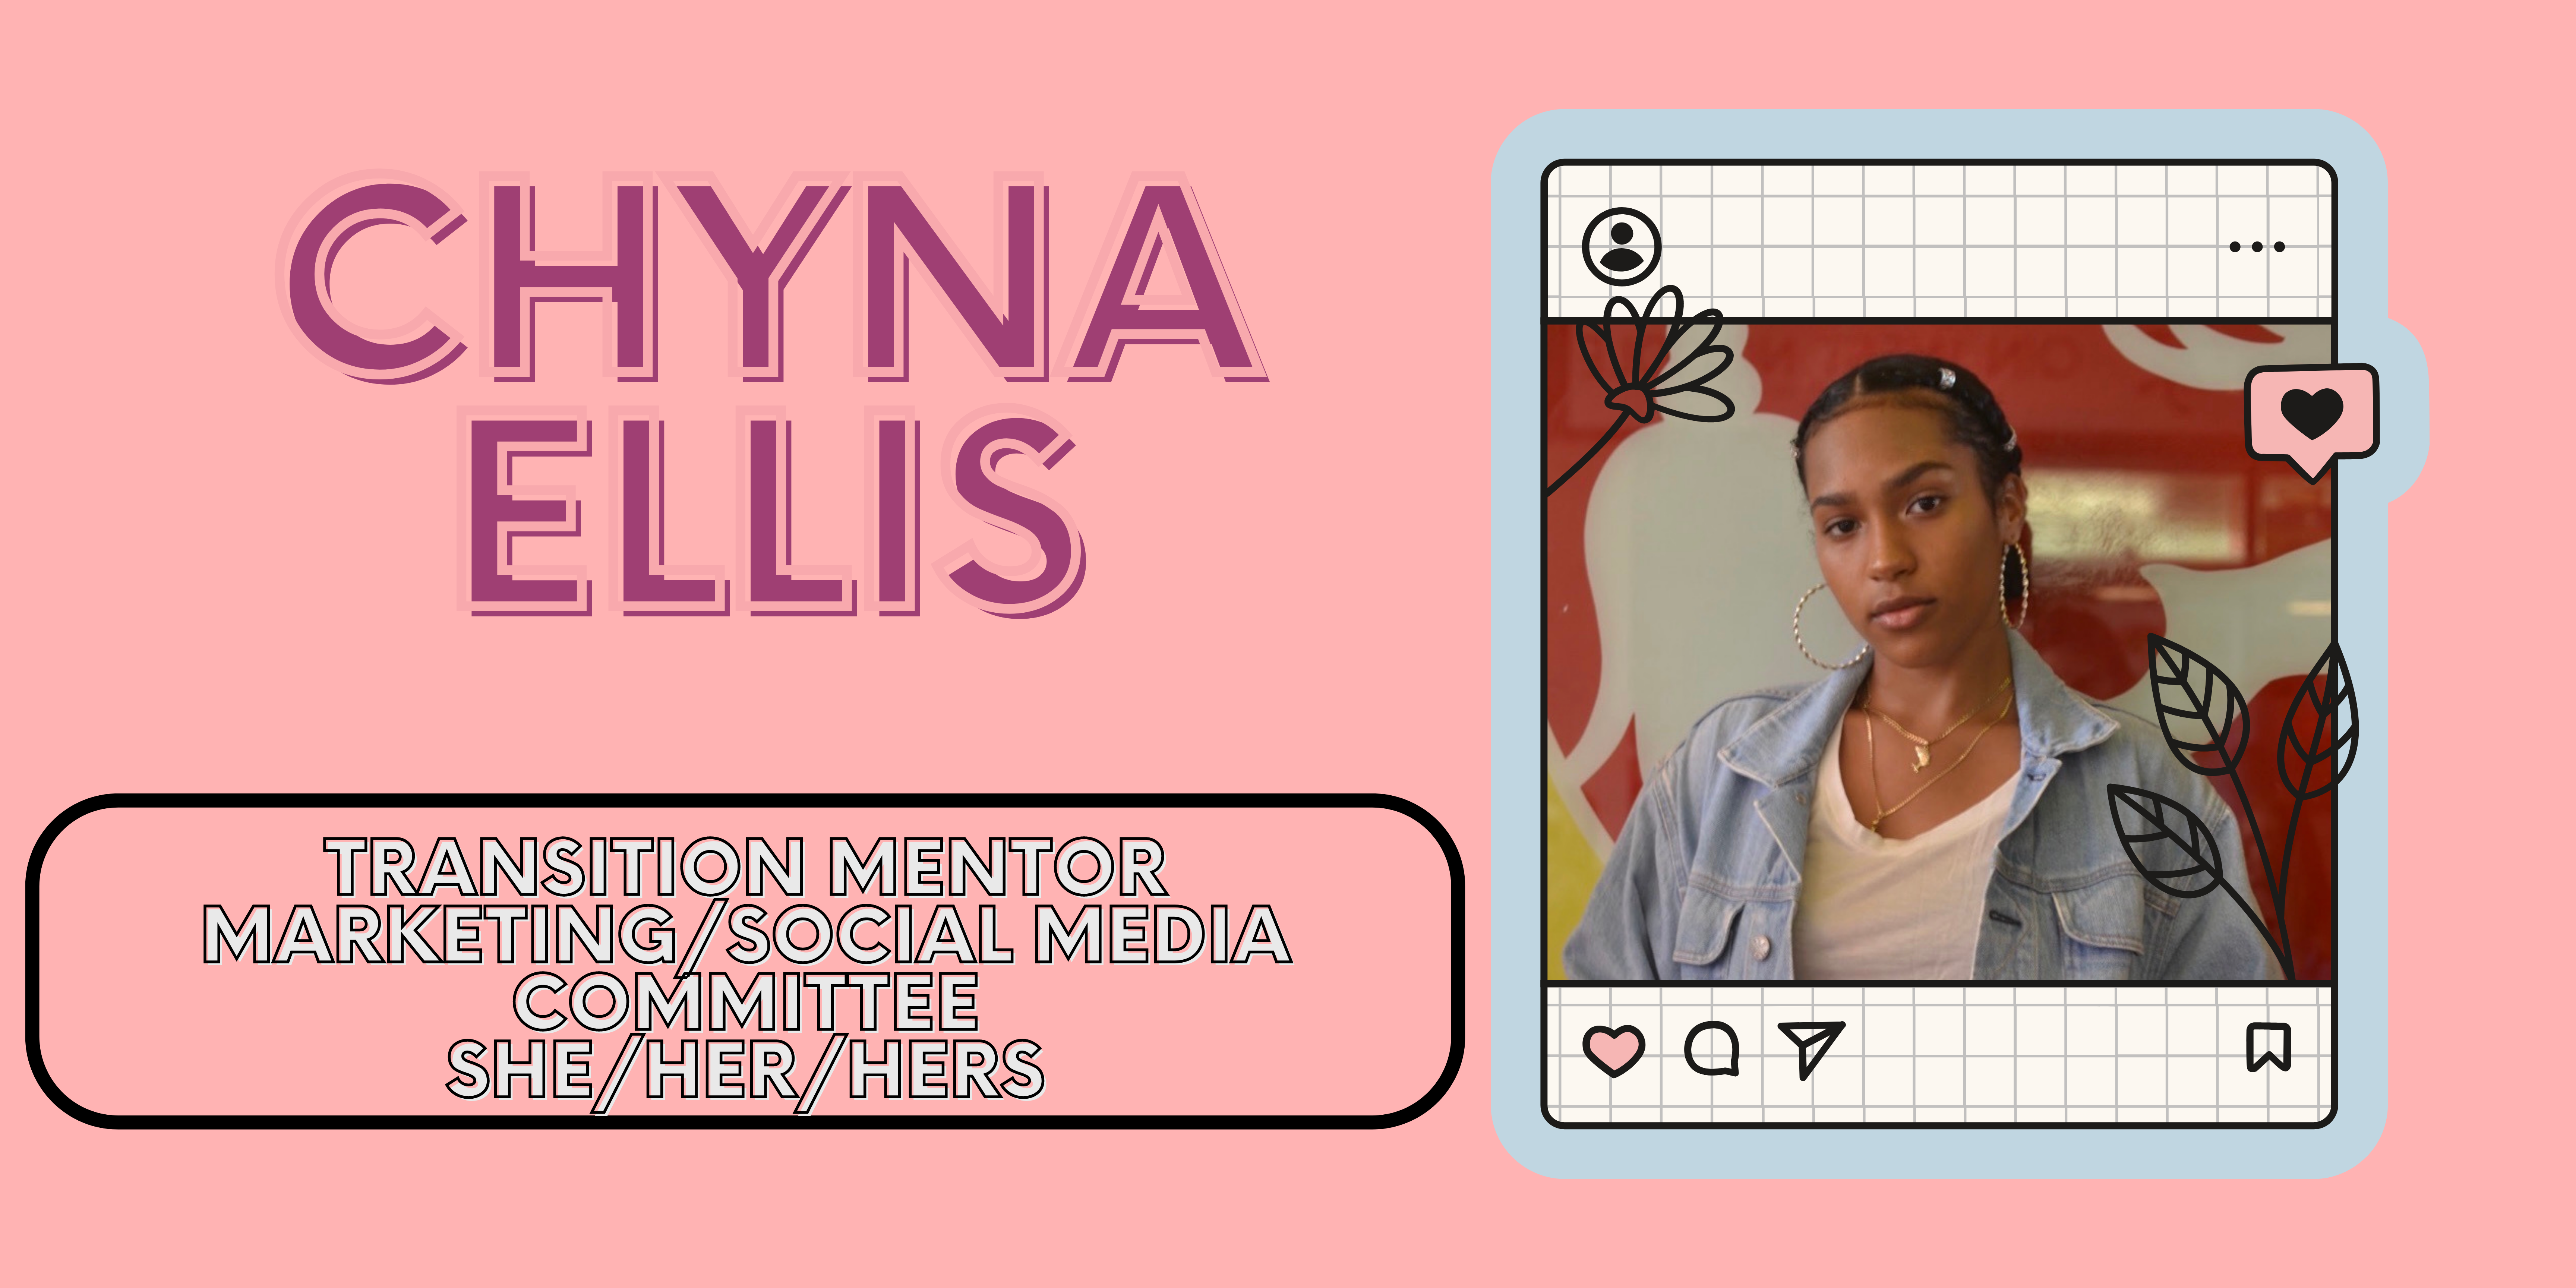 Transition Mentor: Chyna Ellis, pronouns: she/her, Marketing/Social Media Committee